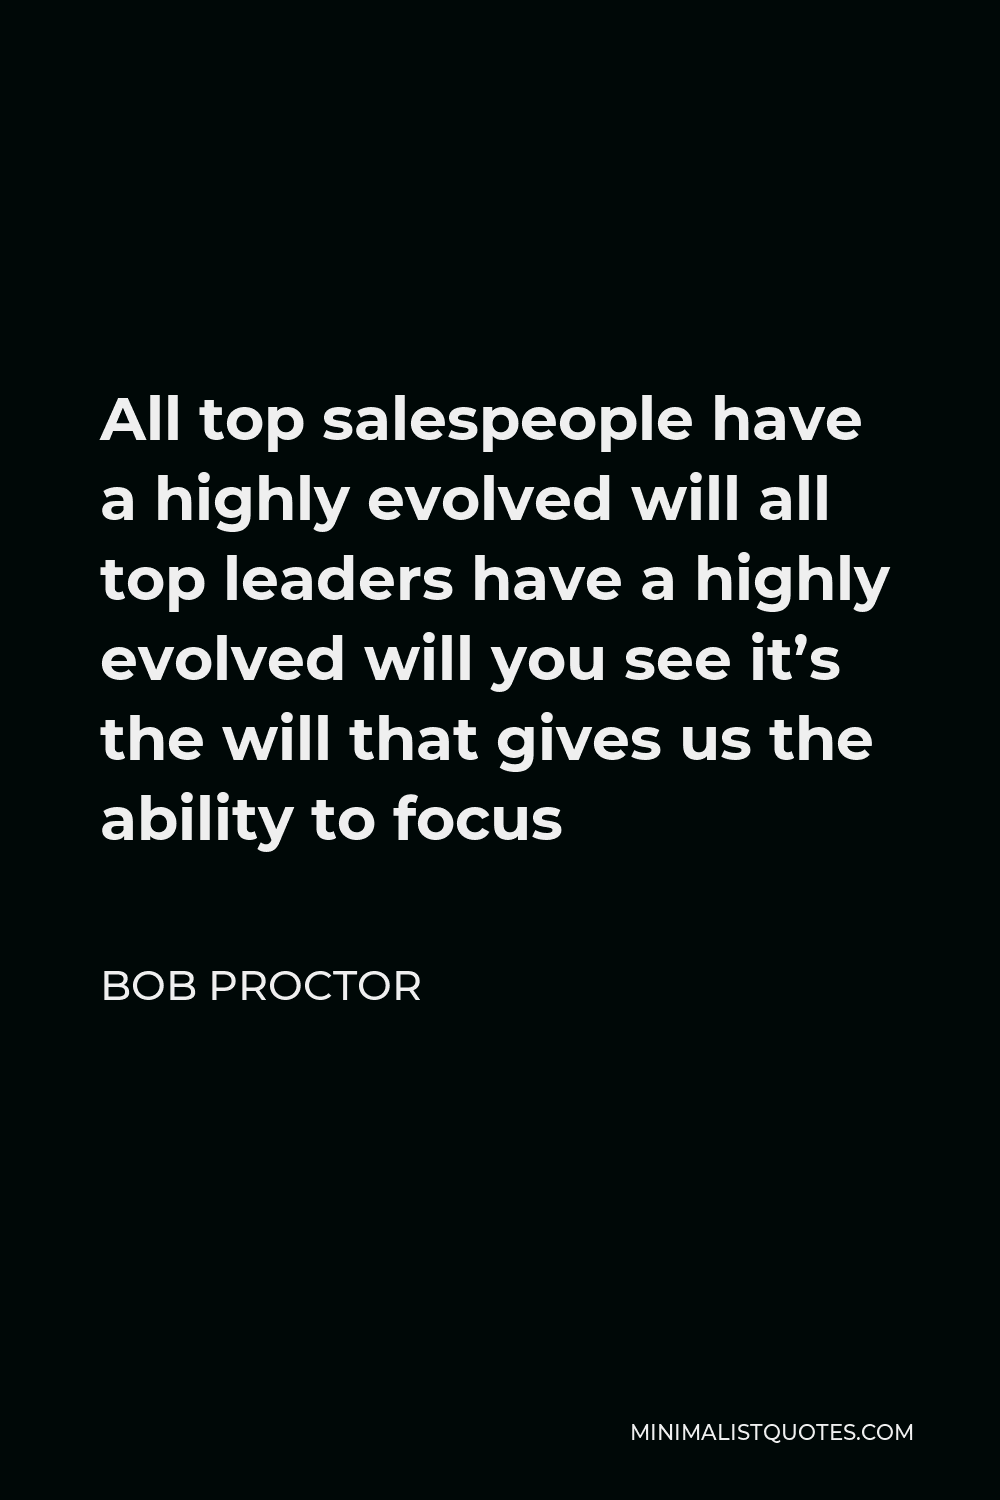 Bob Proctor Quote - All top salespeople have a highly evolved will all top leaders have a highly evolved will you see it’s the will that gives us the ability to focus